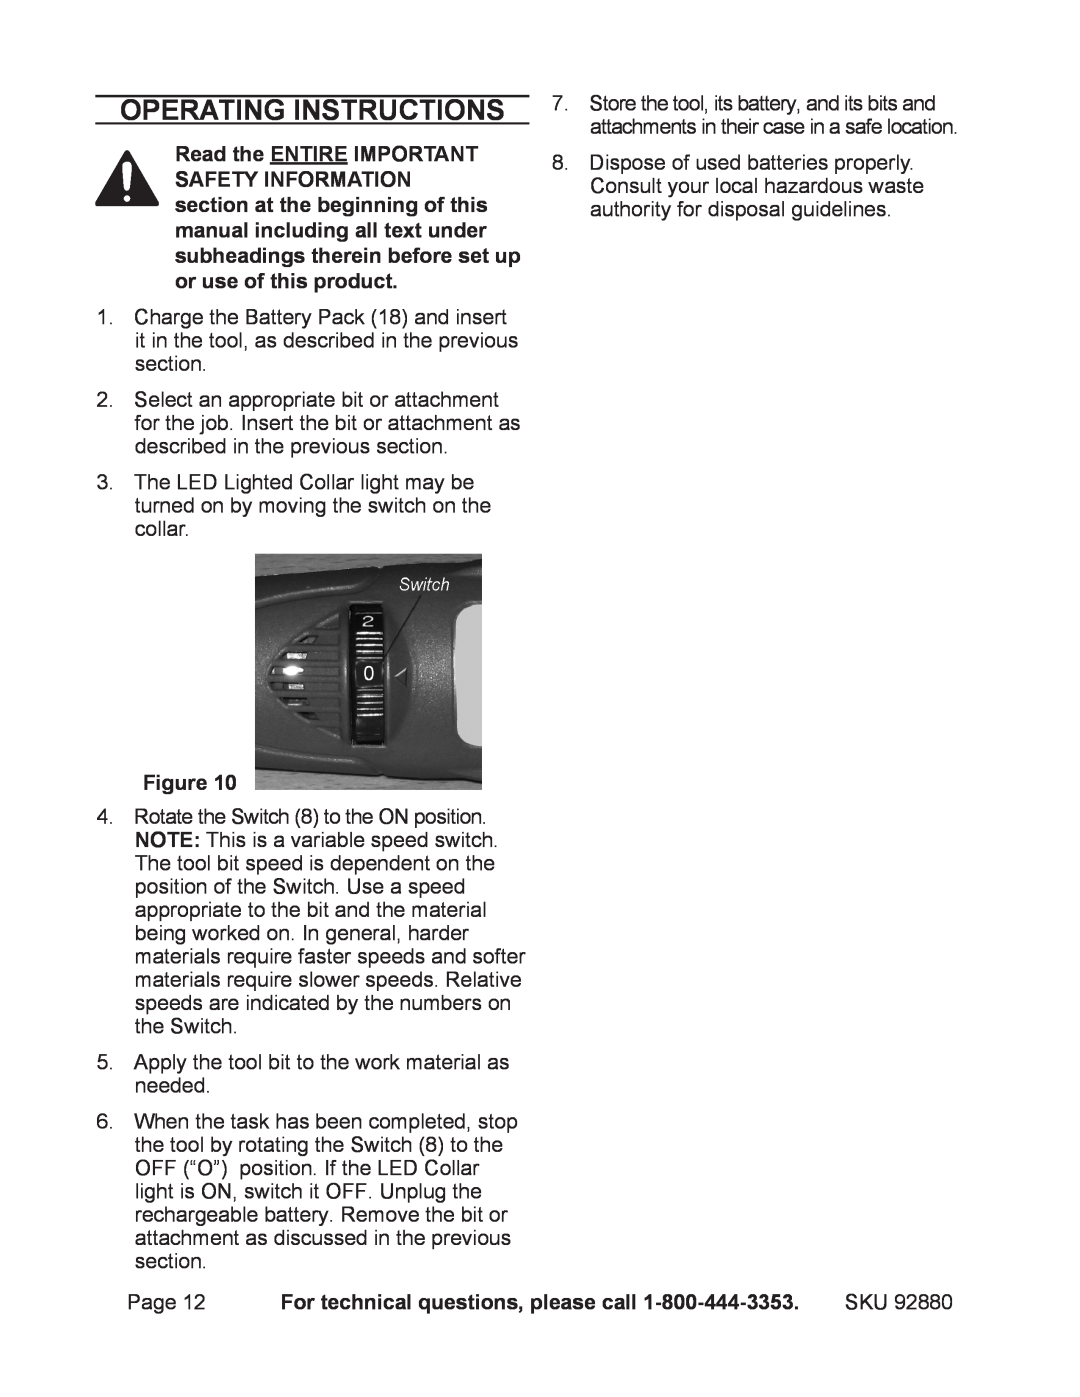 Chicago Electric 92880 operating instructions Operating Instructions 